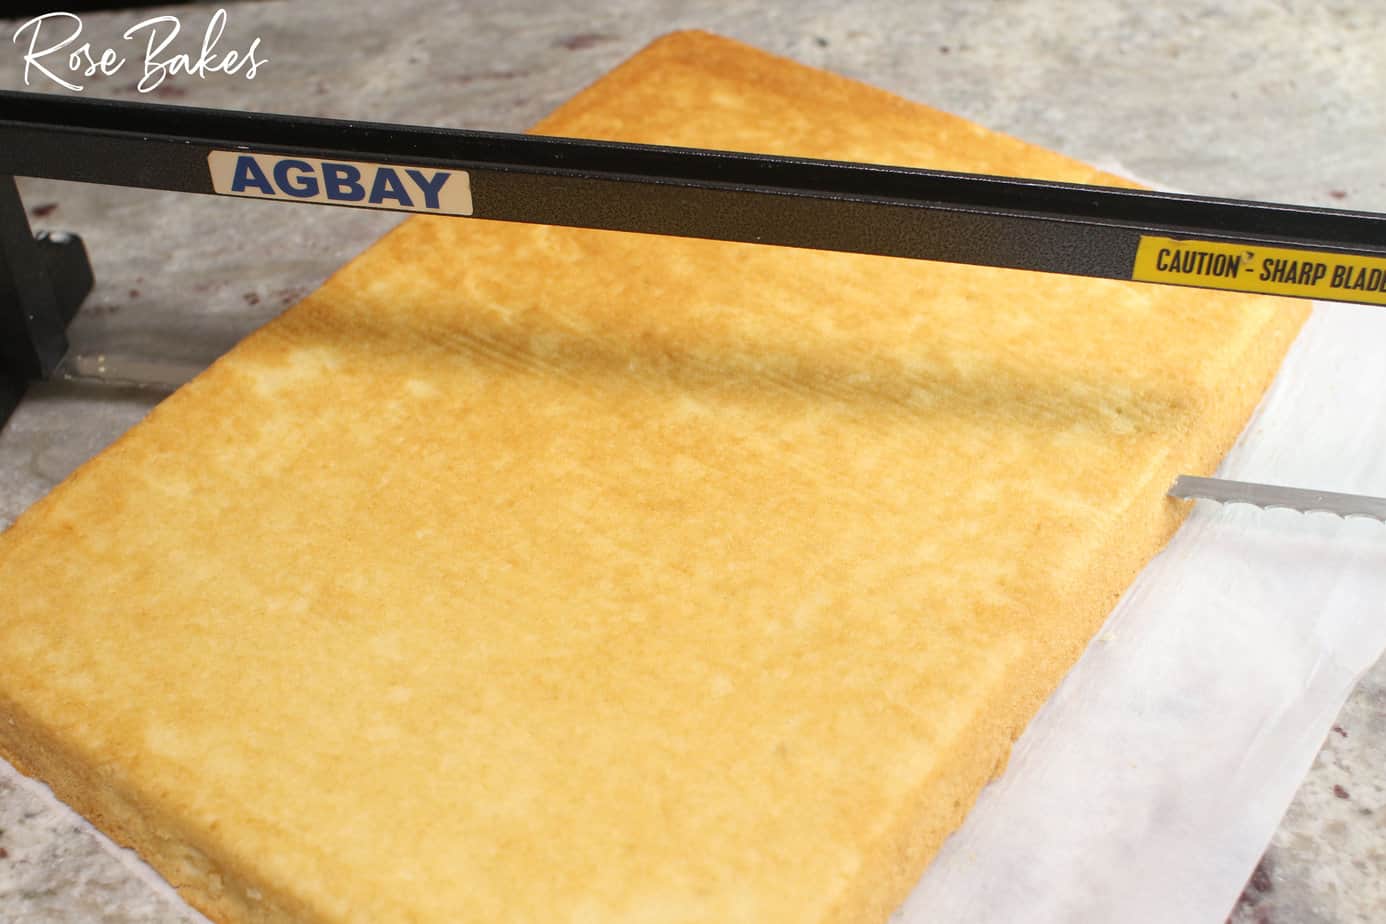 torting the cake with an Agbay cake leveler